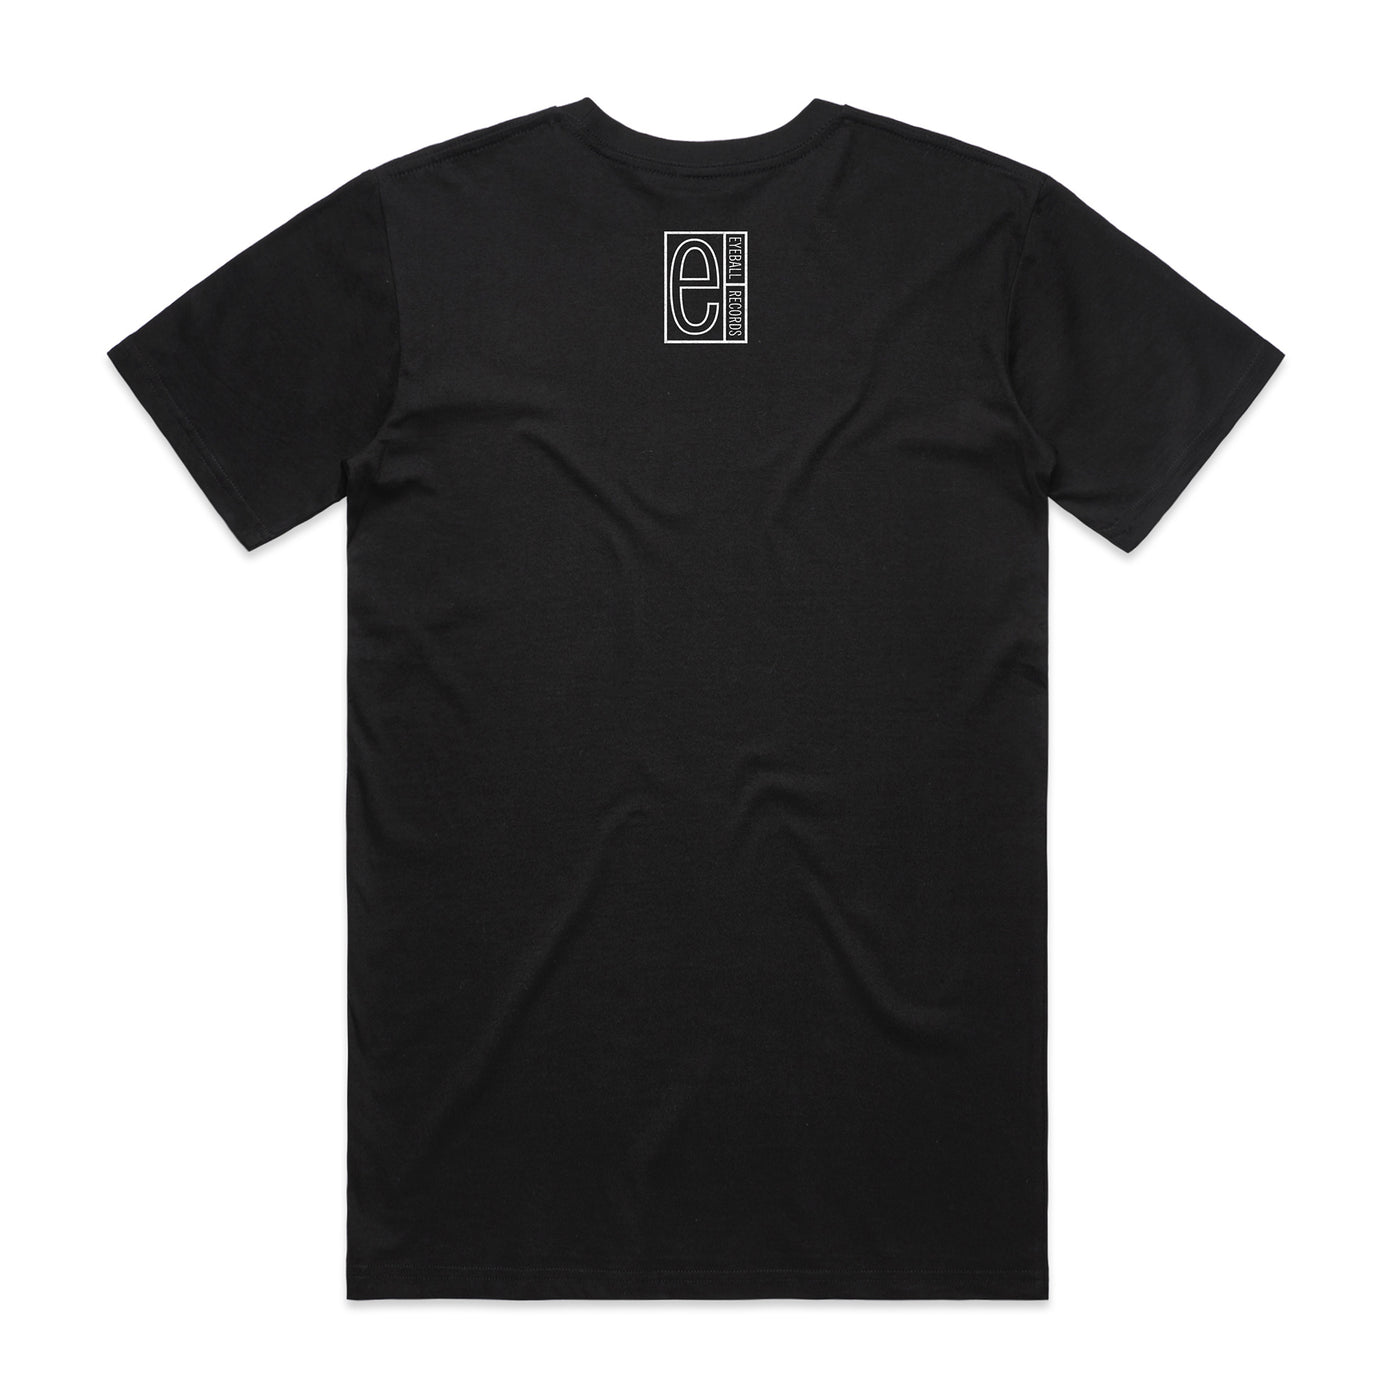 N8NOFACE - Bound to Let You Down (The Remixes) Tee + Vinyl